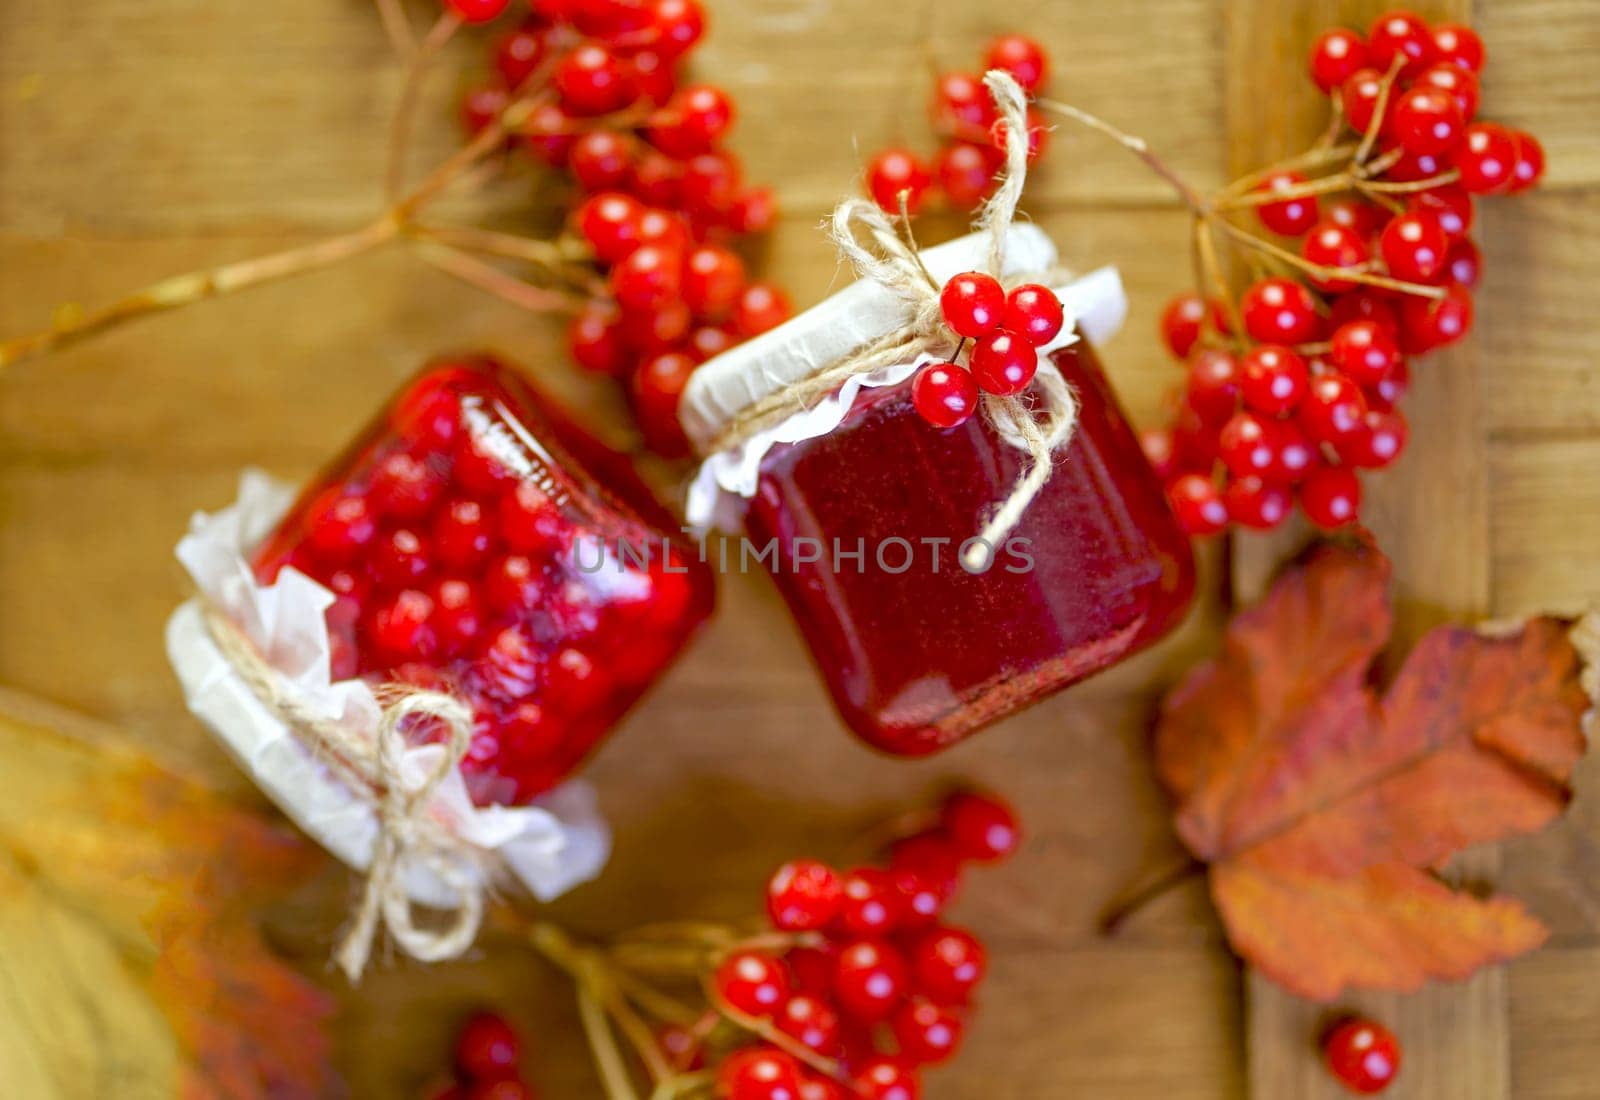 viburnum jam. Red juicy berries of a viburnum with sugar in a glass jar on a dark wooden background. For making jam, tea.